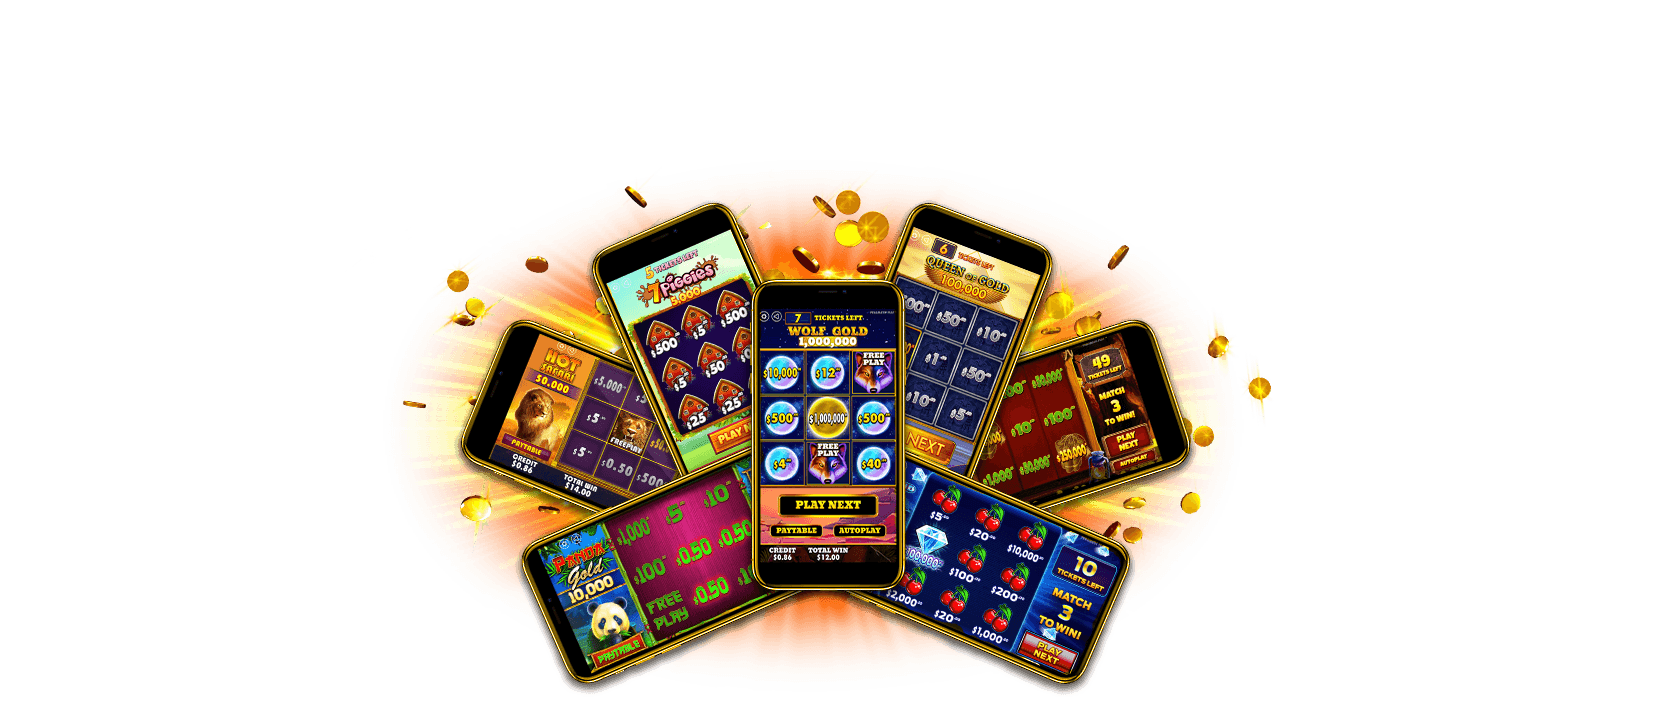 Free Slot Machine Game Download For Mobile